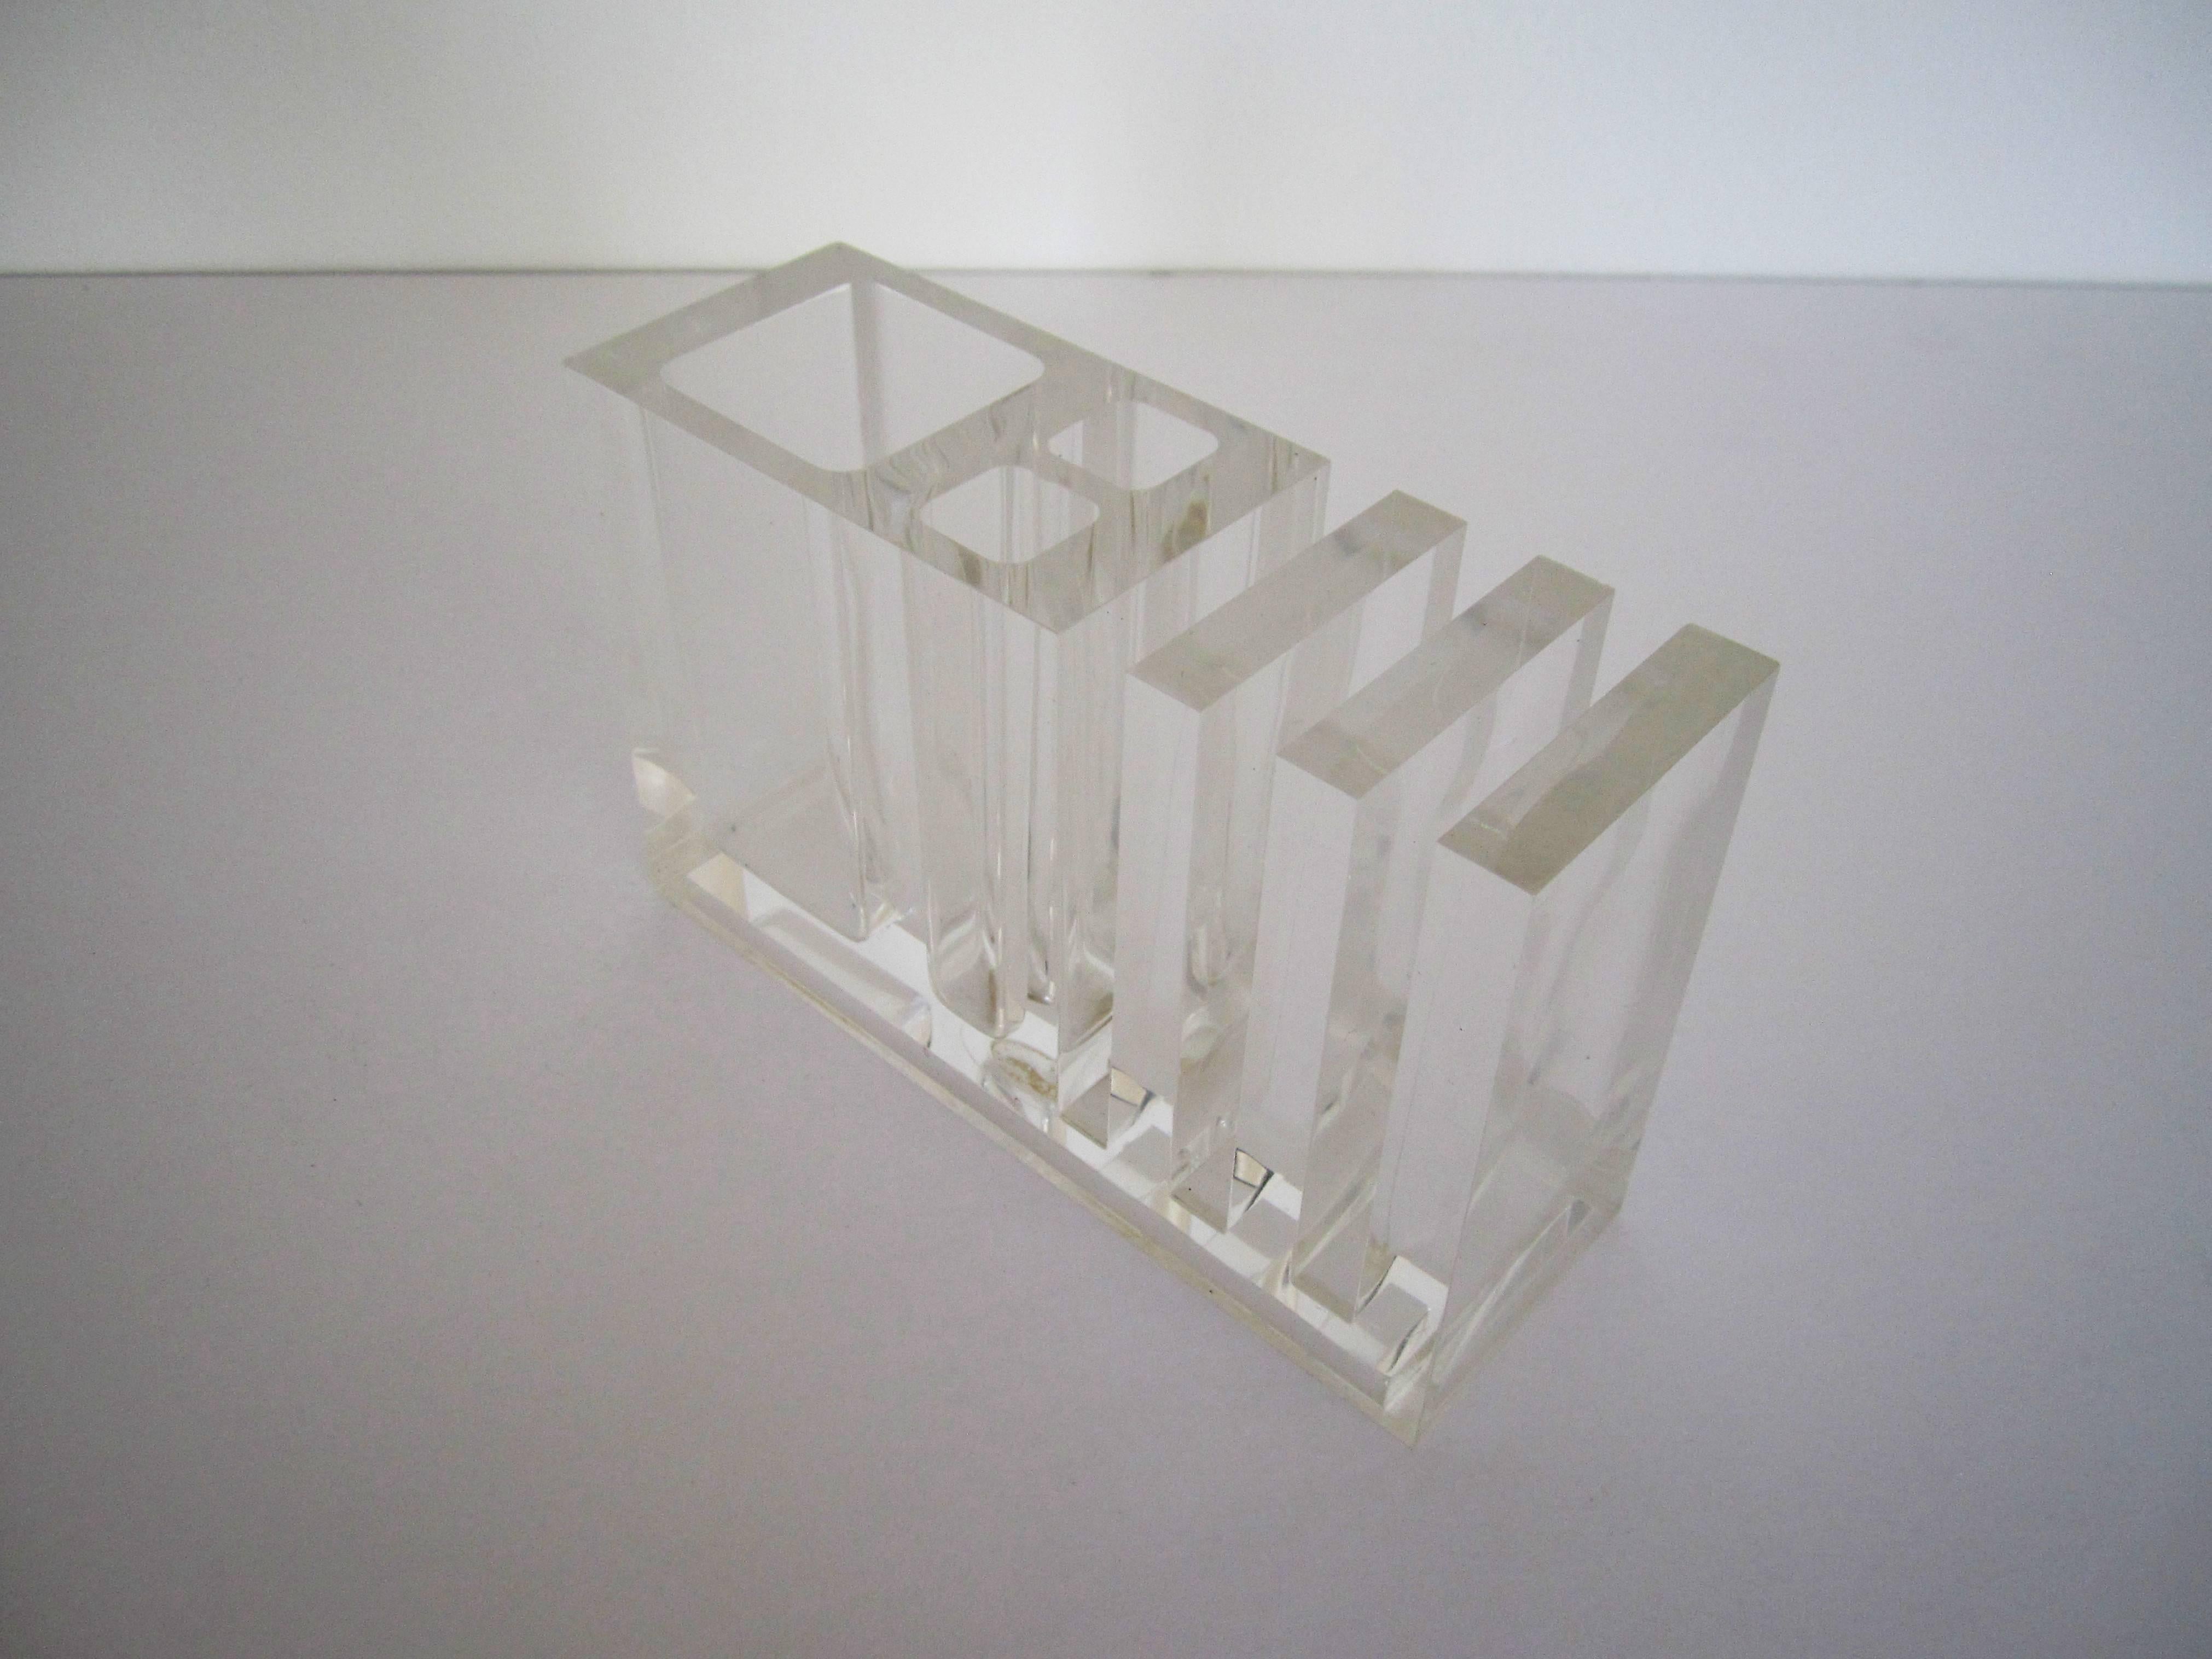 An Italian Postmodern or Modern style designer Lucite pen, pencil, and paper desk organizer/holder, Italy, circa 1980s, by Rede Guzzini. With maker's mark label on bottom 'Guzzini' 'Made in Italy,' as show in image #5. 

